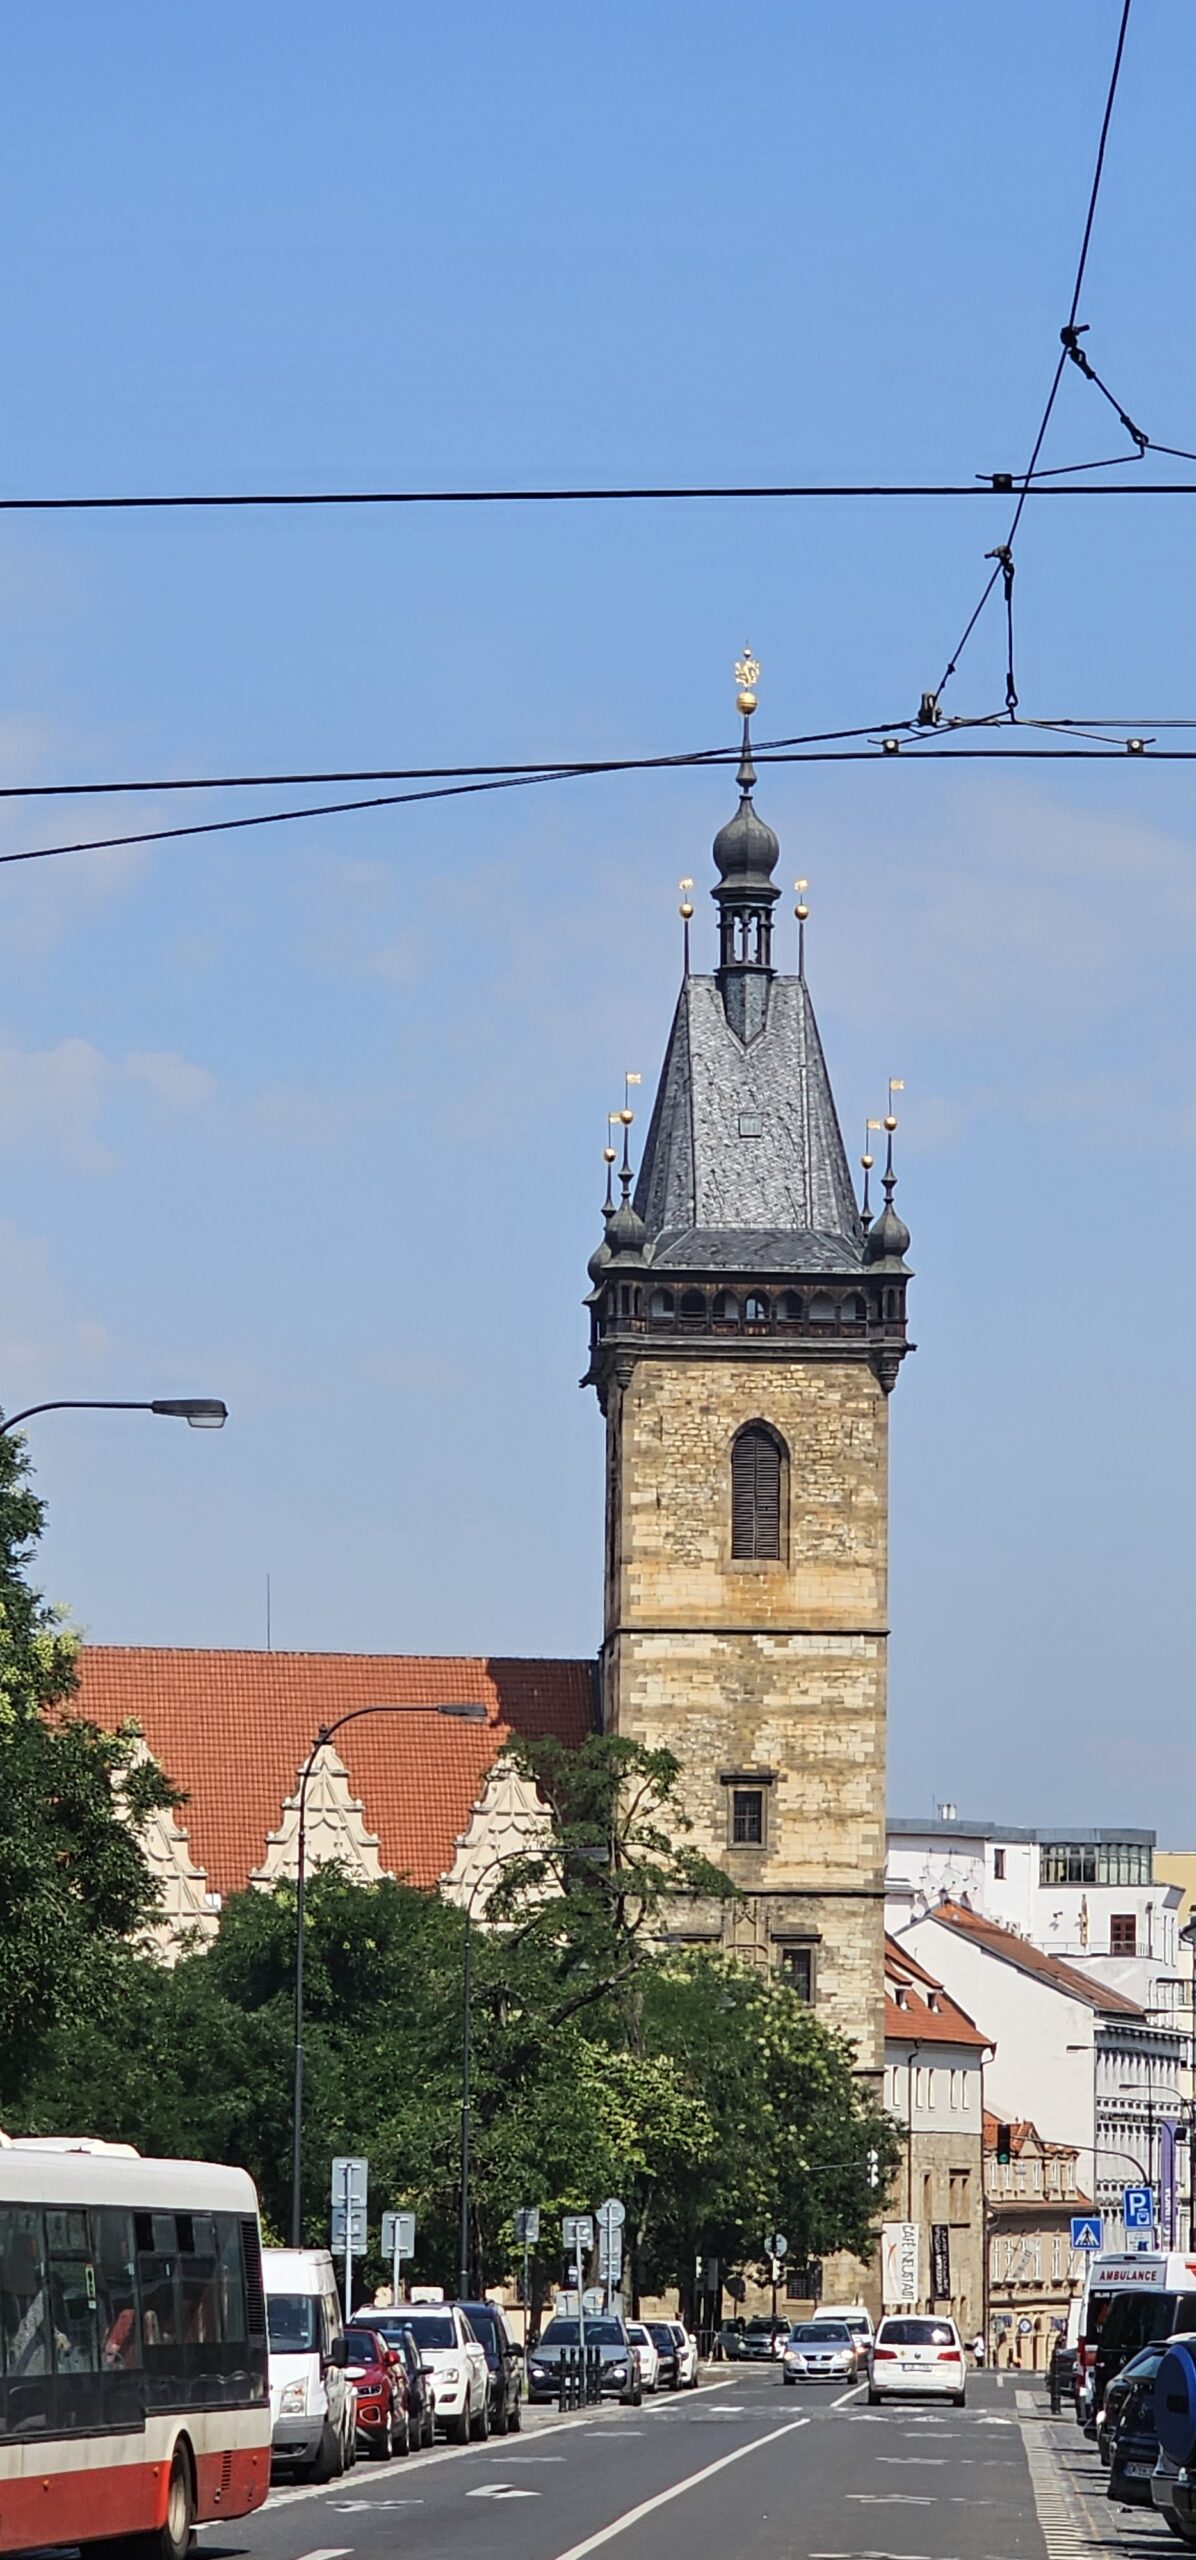 The New Town Hall in Prague, where the first Defenestration took place in 1419. A tower with two windows can be seen across road. In front of the town hall are some trees.